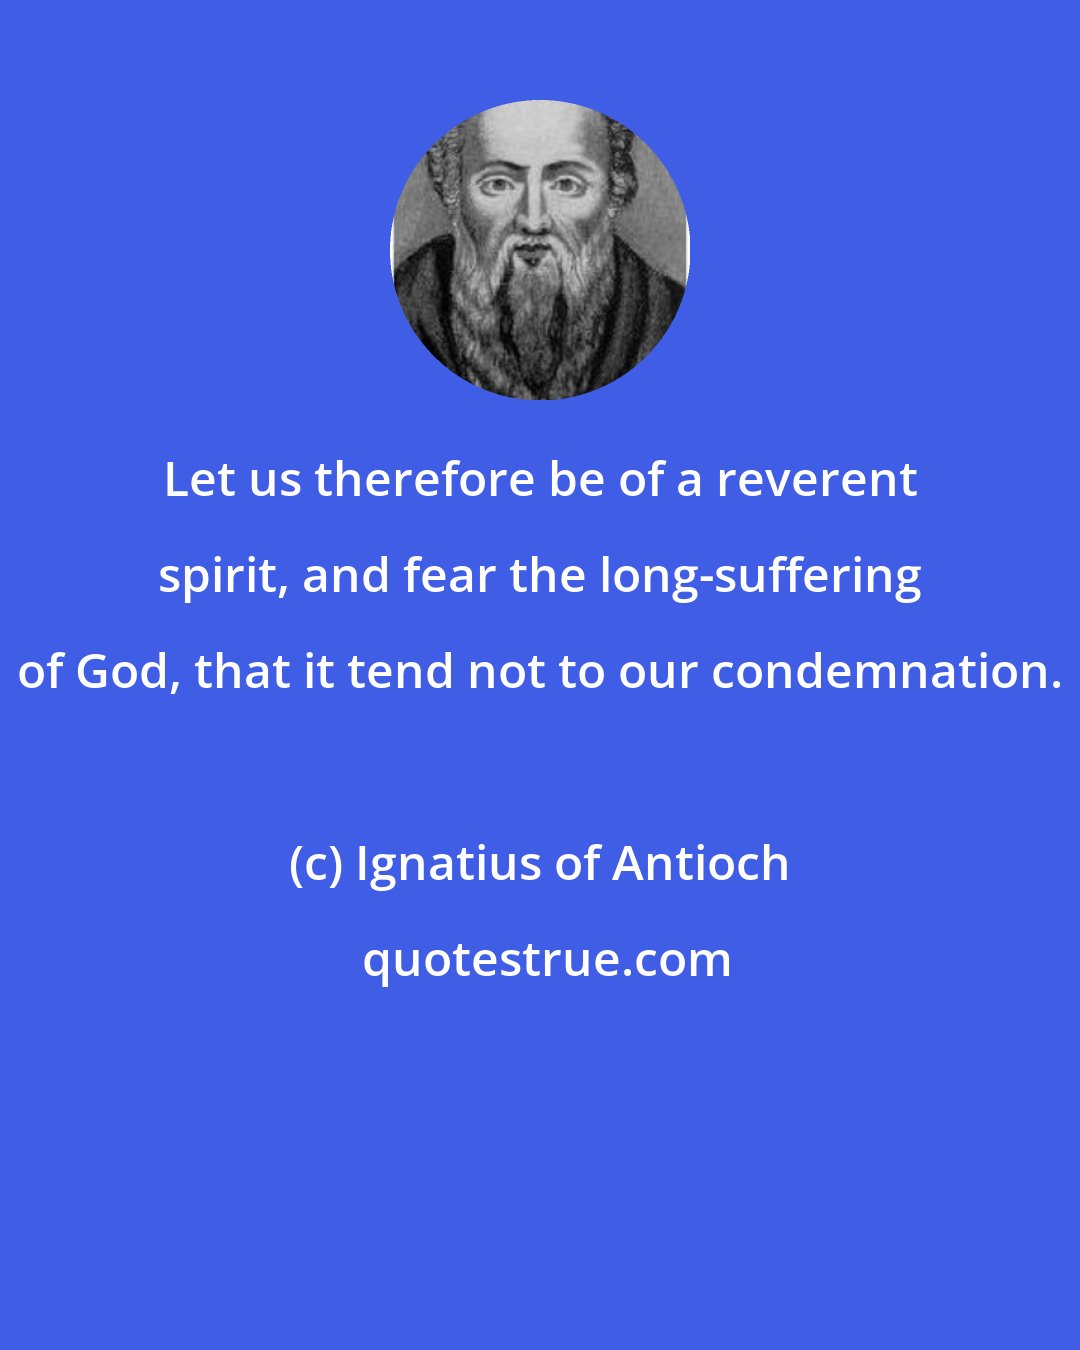 Ignatius of Antioch: Let us therefore be of a reverent spirit, and fear the long-suffering of God, that it tend not to our condemnation.